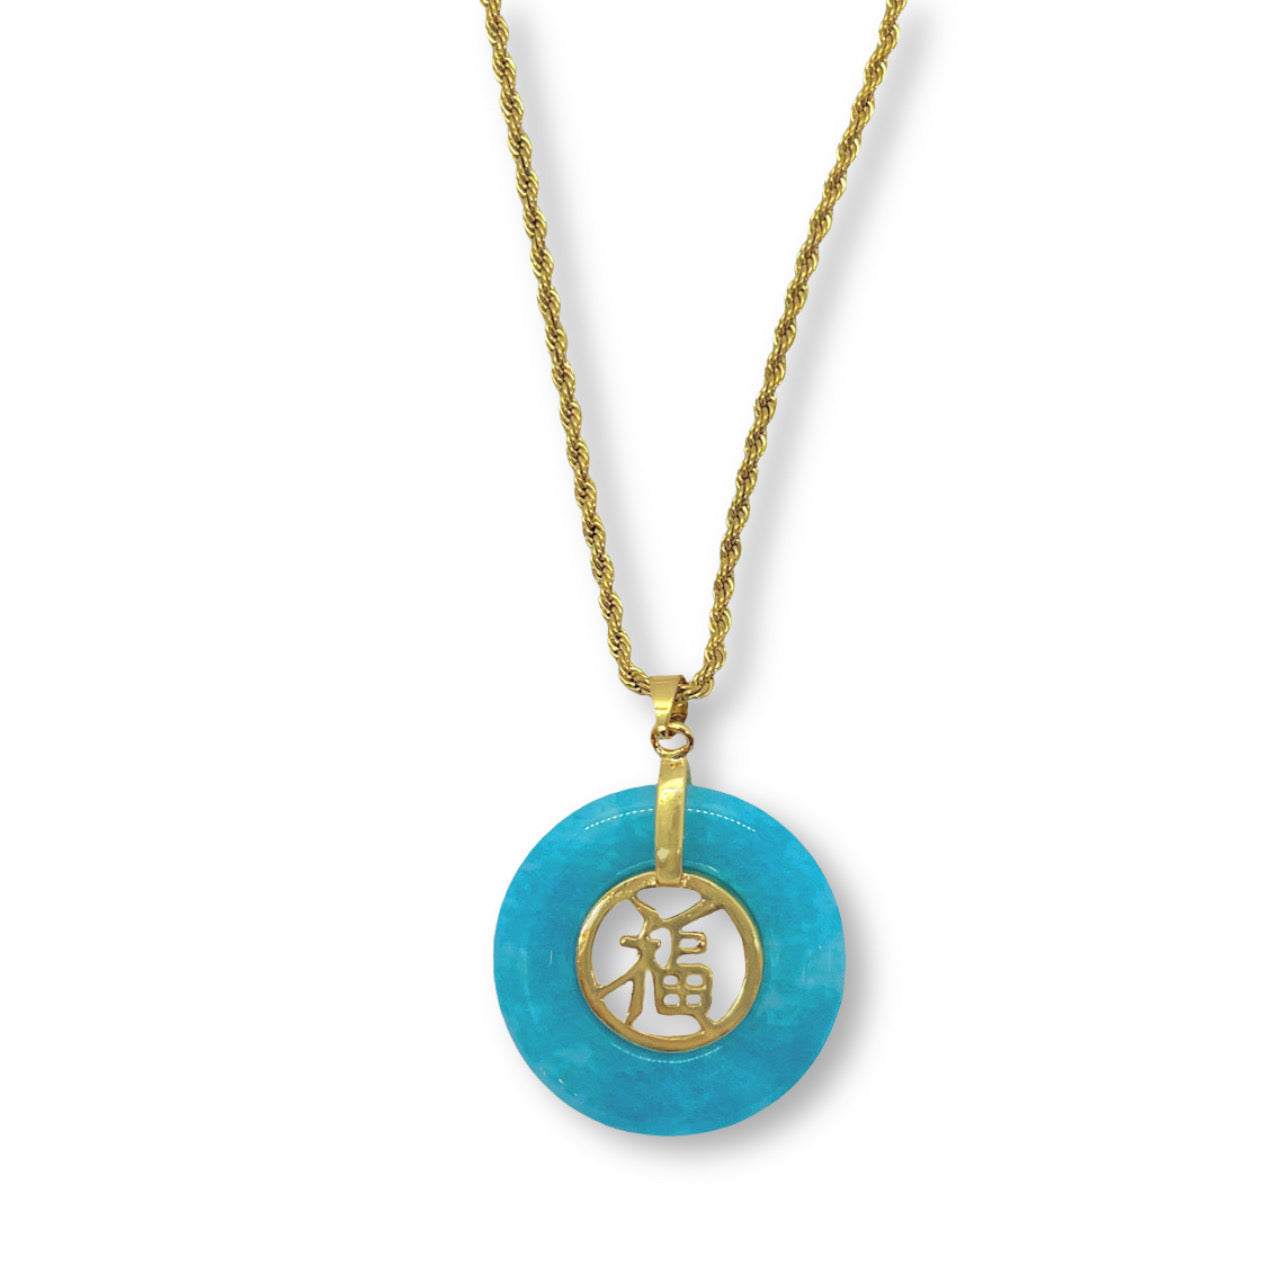 Light Blue Good Fortune Jade Necklace 18 Inches / Twisted Chain